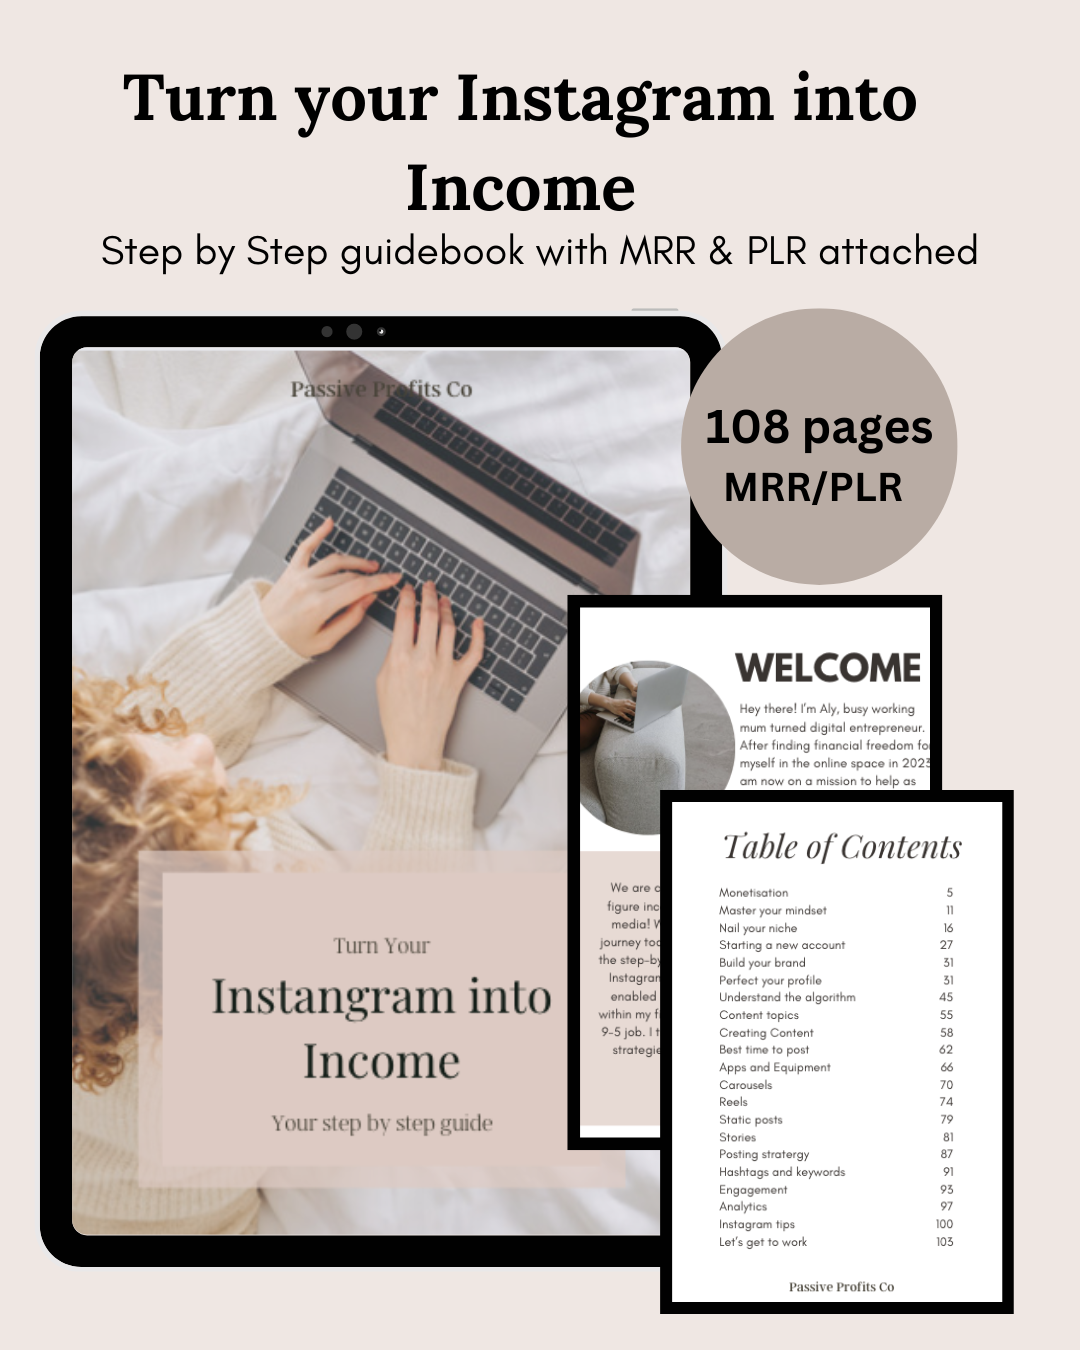 Turn your Instagram into Income